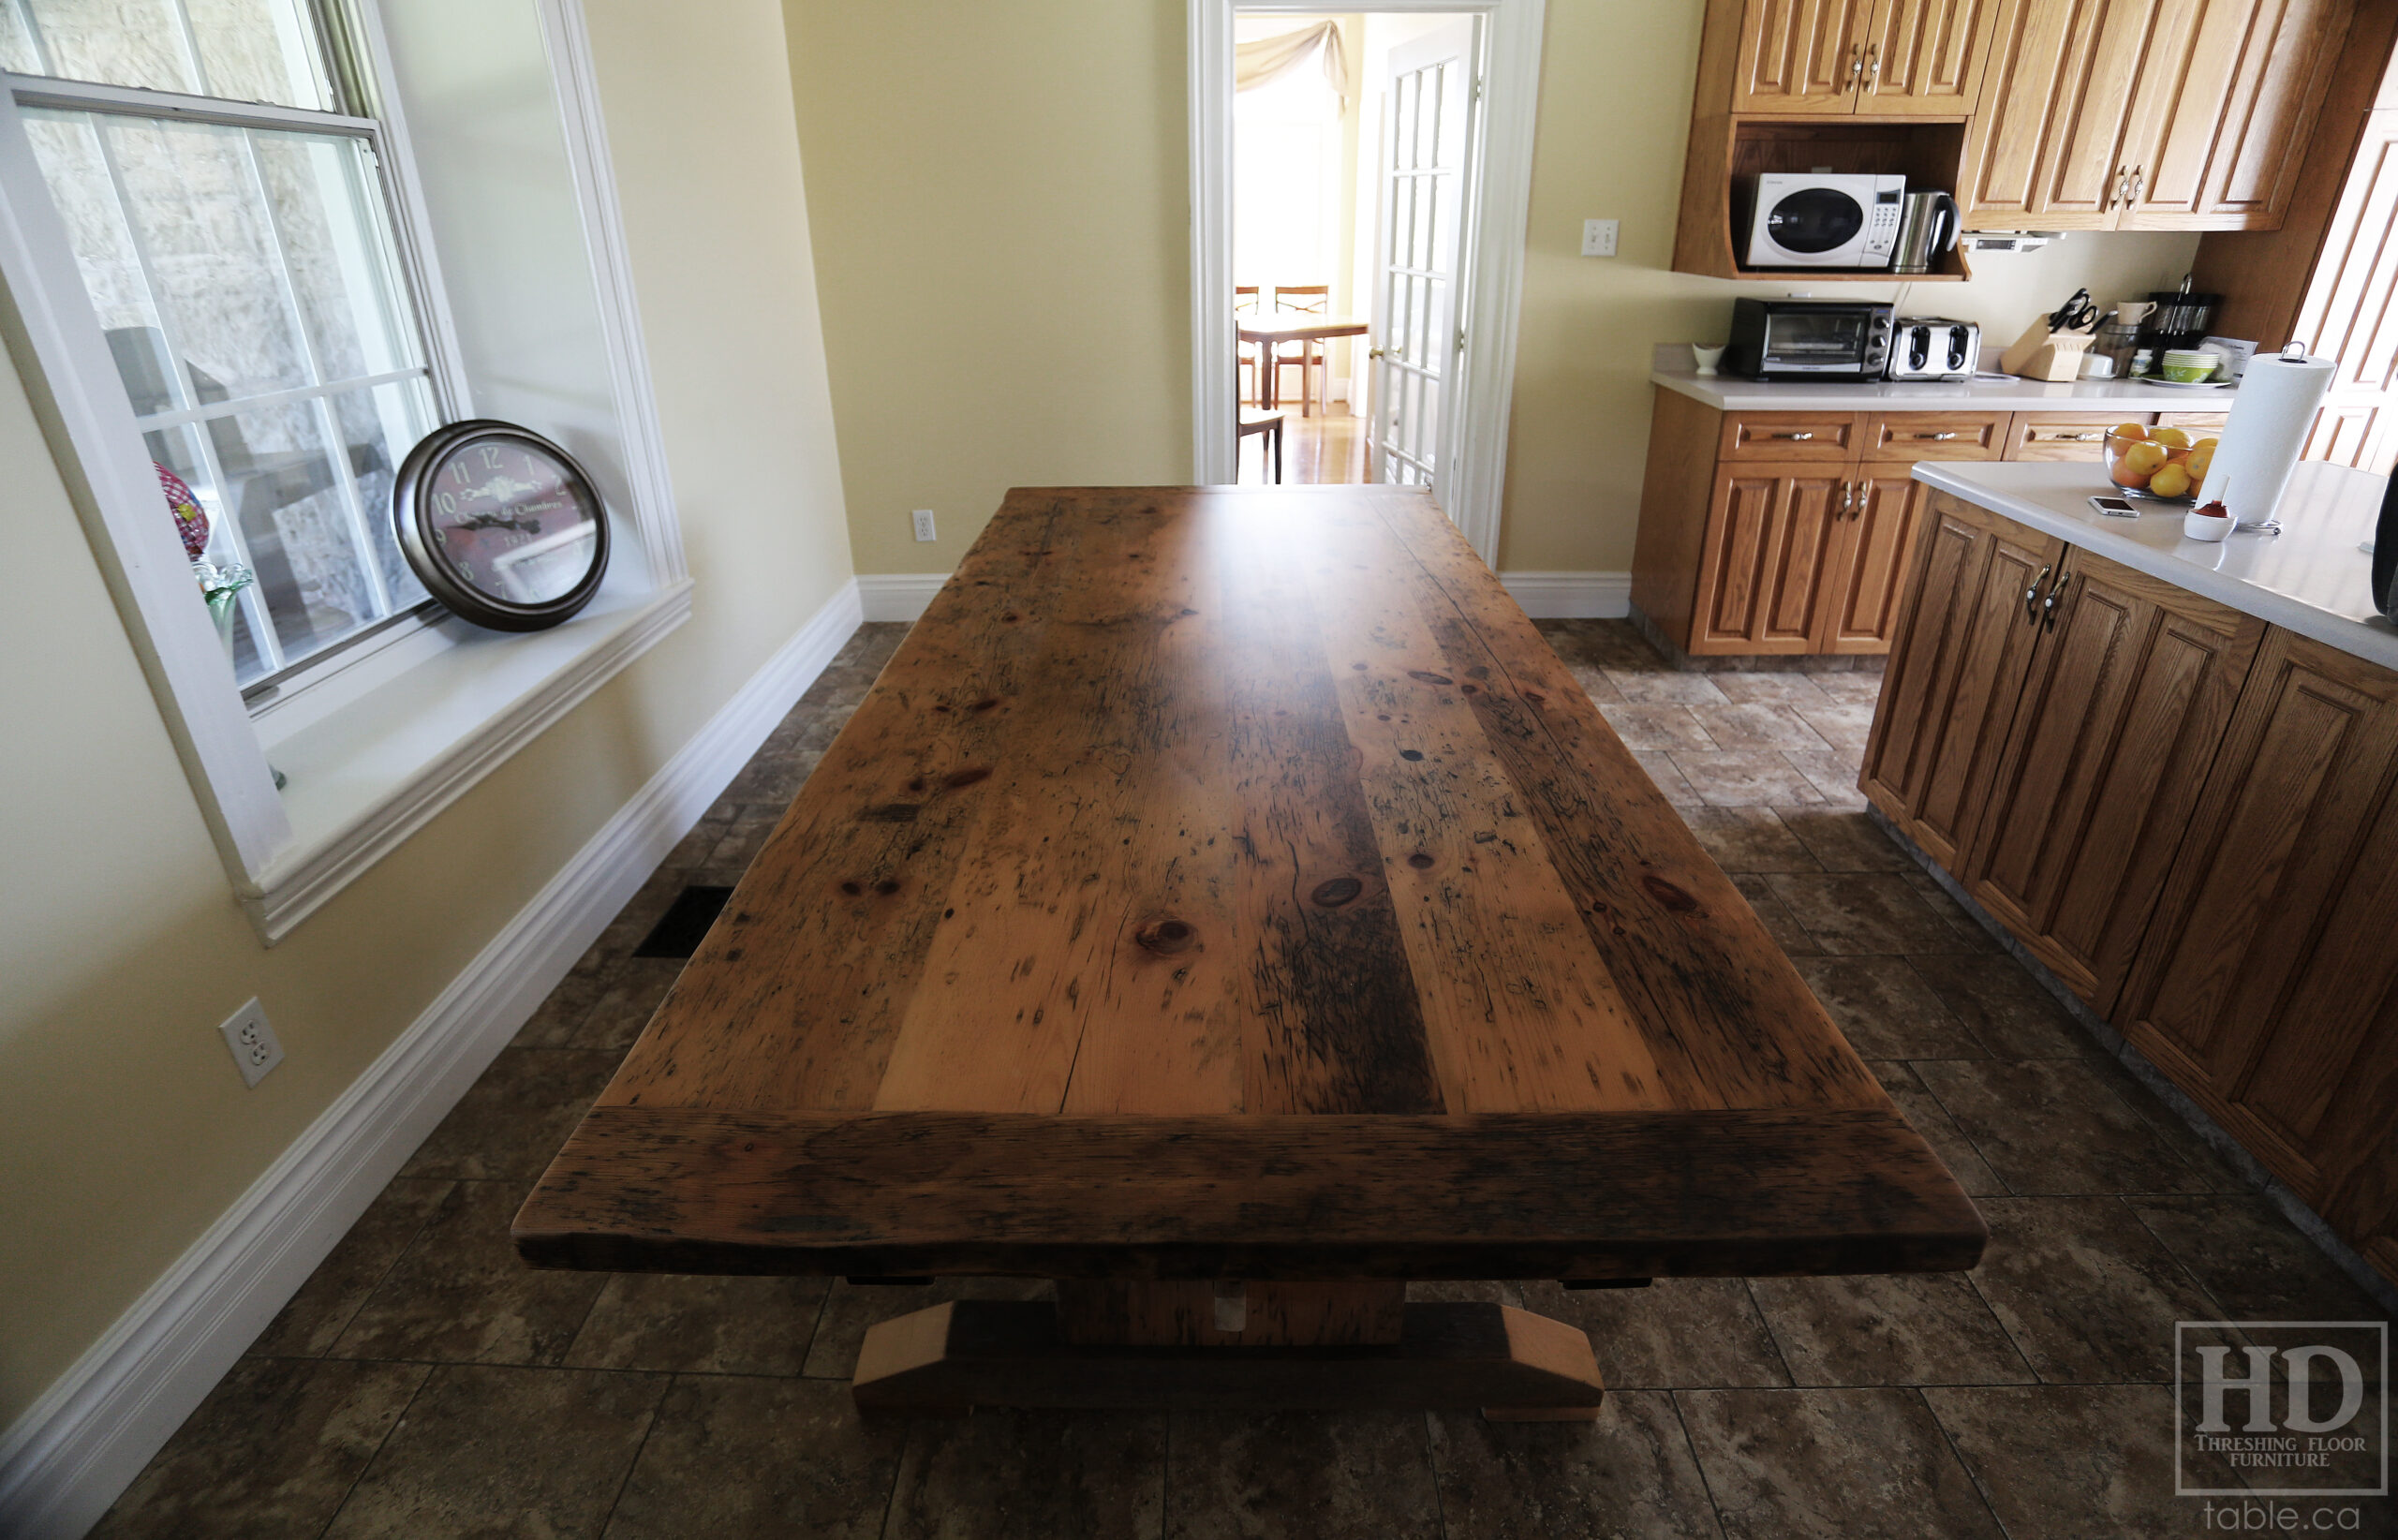 Reclaimed Wood Table with Greytone Treatment Option to Maintain the Colour of Unfinished by HD Threshing Floor Furniture / www.table.ca